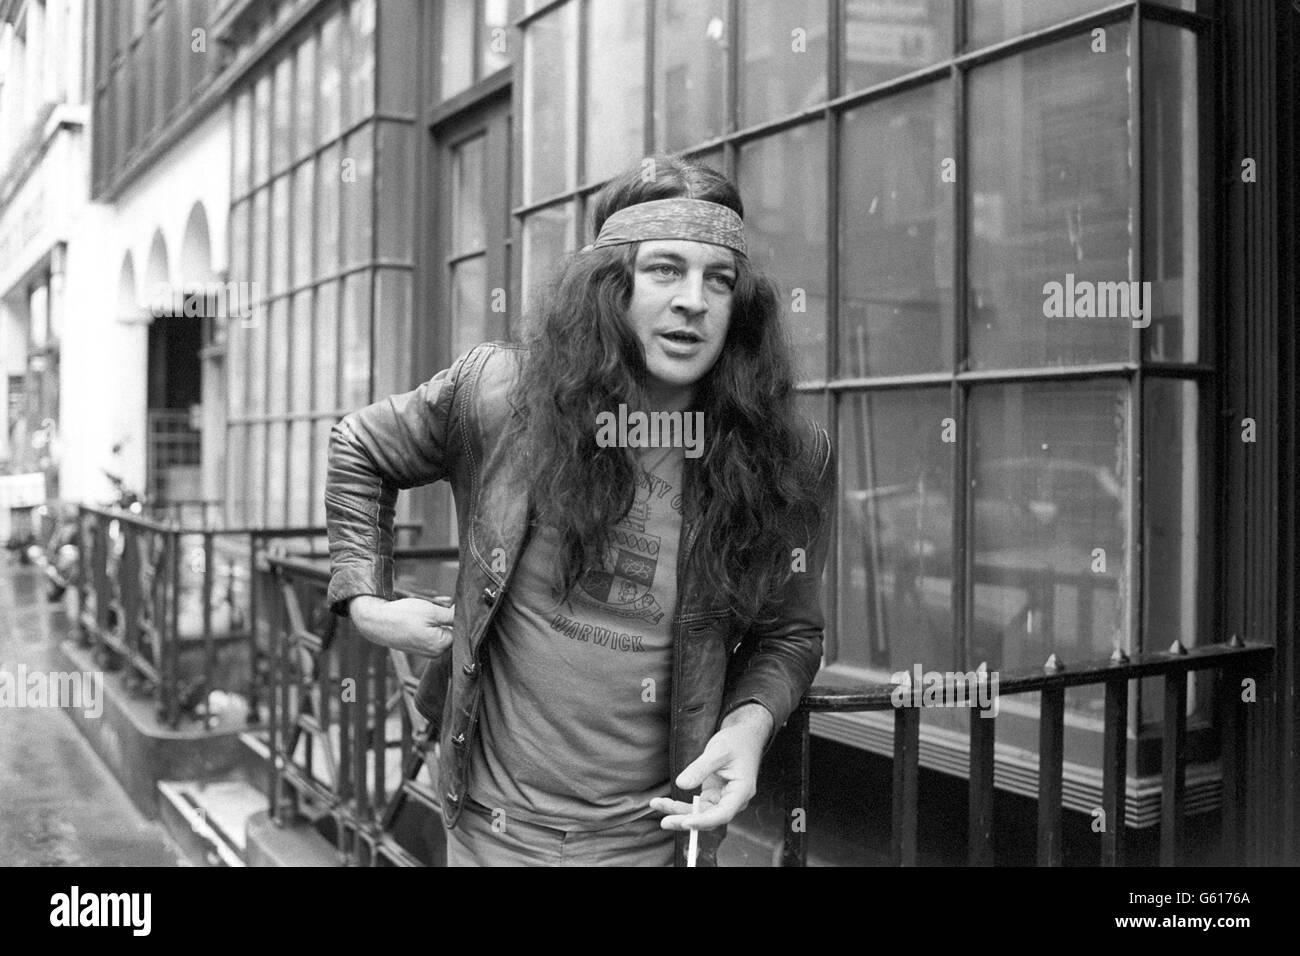 Ian Gillan, formerly singer with the rock band Deep Purple, in London today when it was announced that he is to join Black Sabbath. Stock Photo